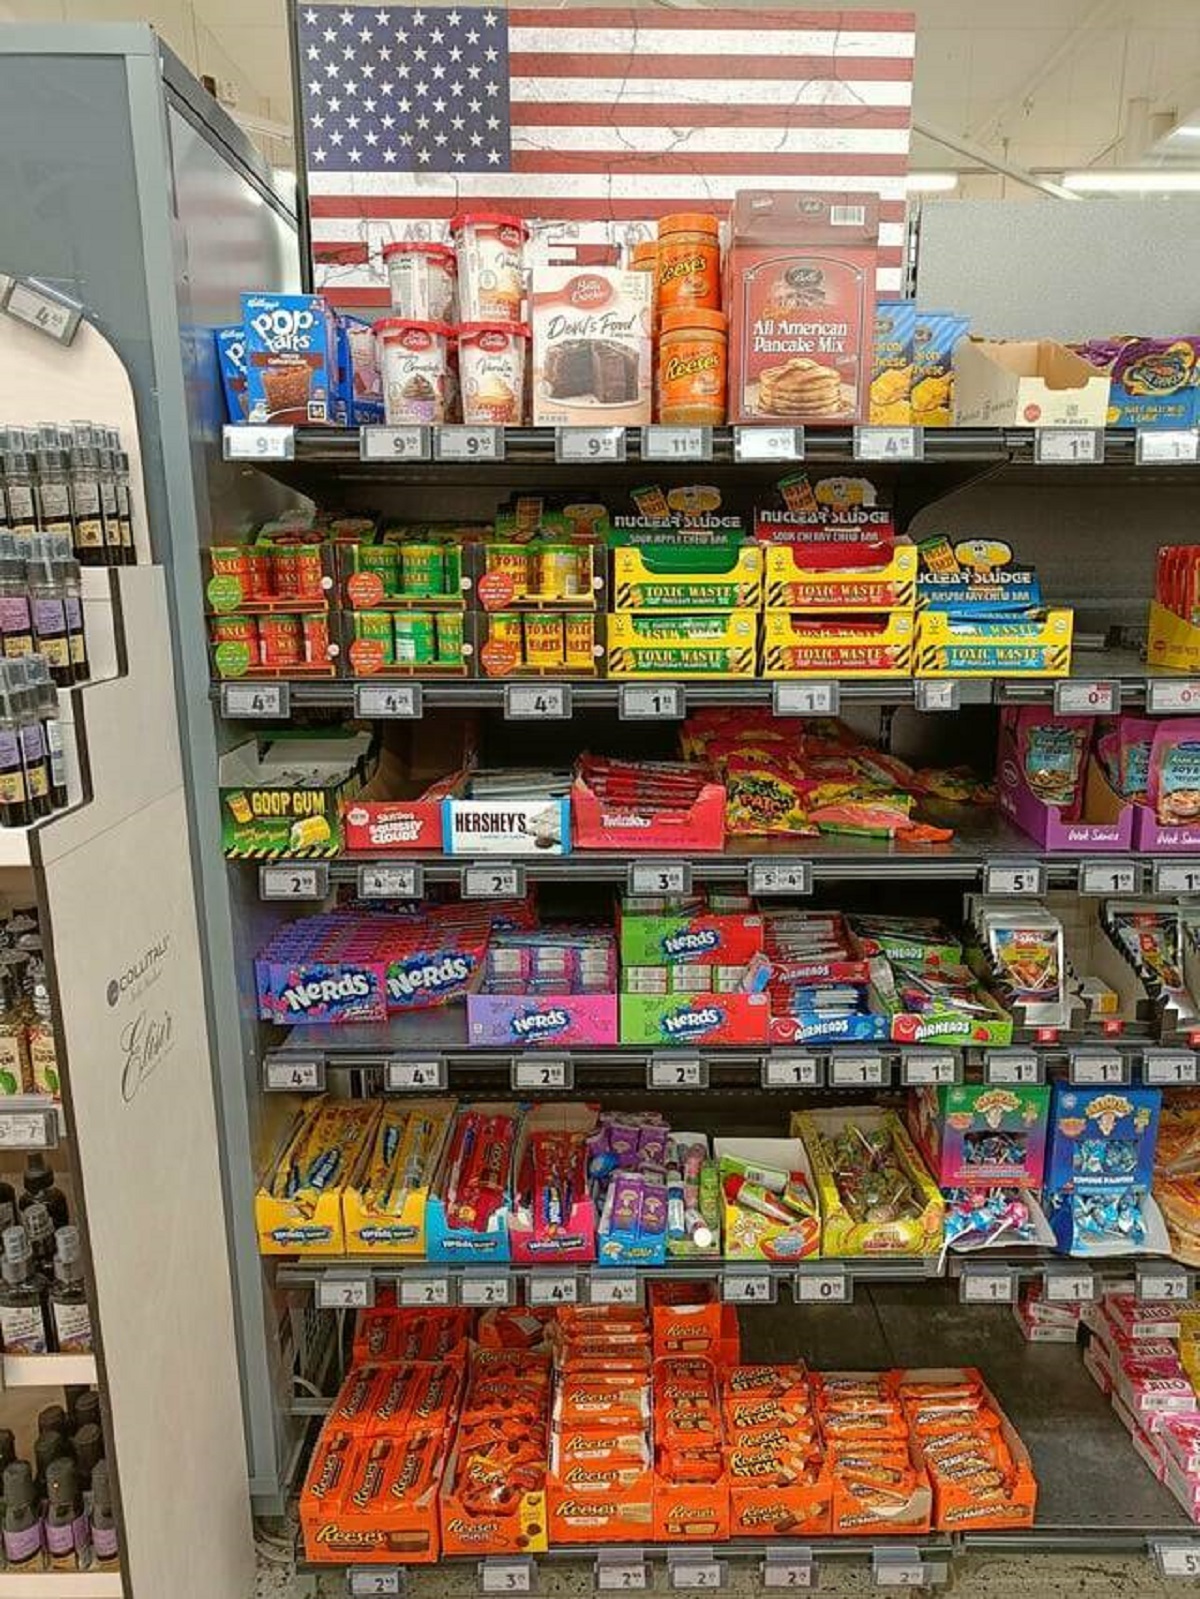 "The "Made in USA" section at a Finnish supermarket"